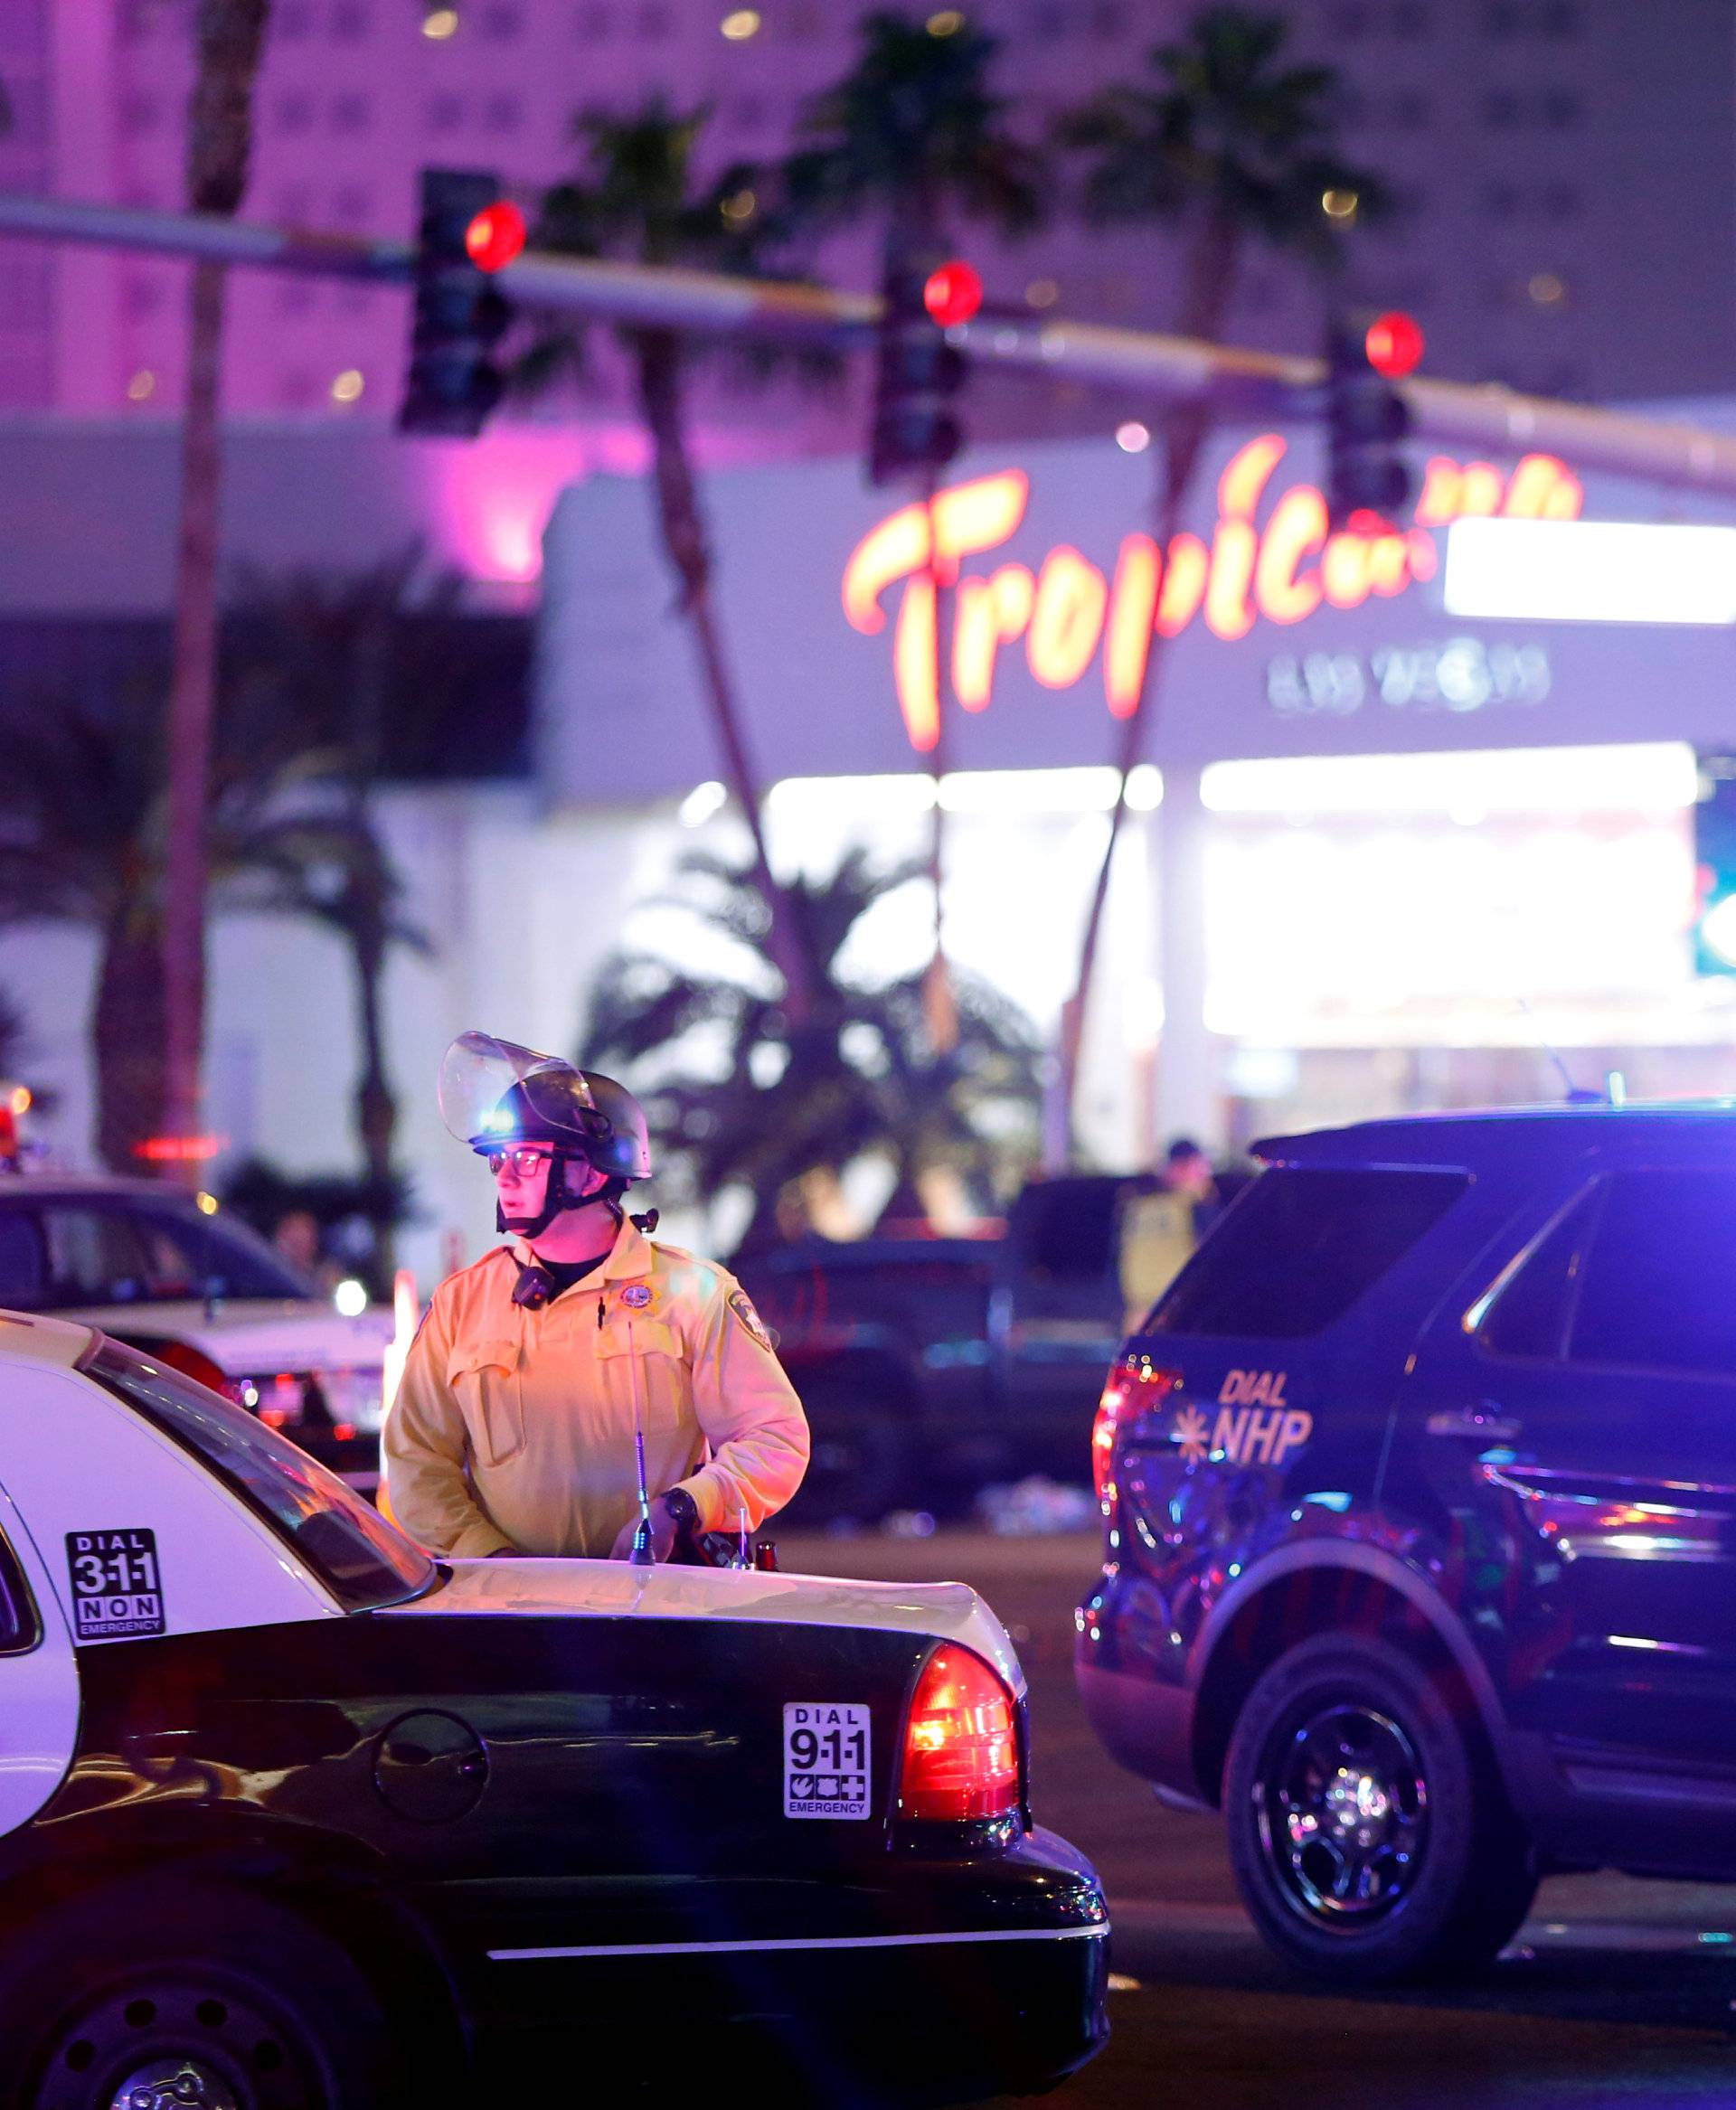 Las Vegas Metro Police officer stands by at a staging area in the intersection of Tropicana Avenue and Las Vegas Boulevard South after a mass shooting at a music festival on the Las Vegas Strip in Las Vegas